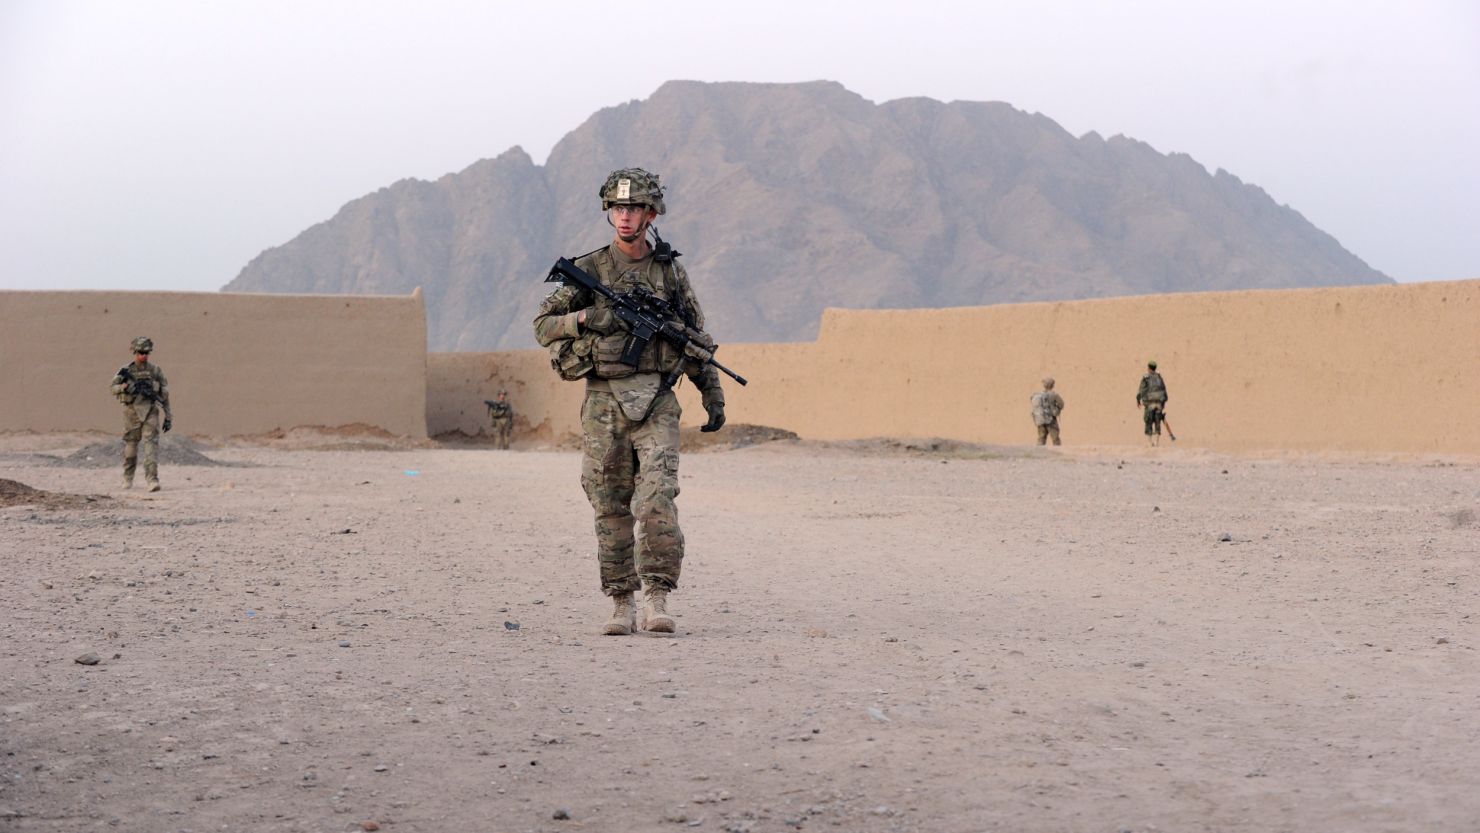 A U.S. soldier on patrol in Kandahar province in Afghanistan